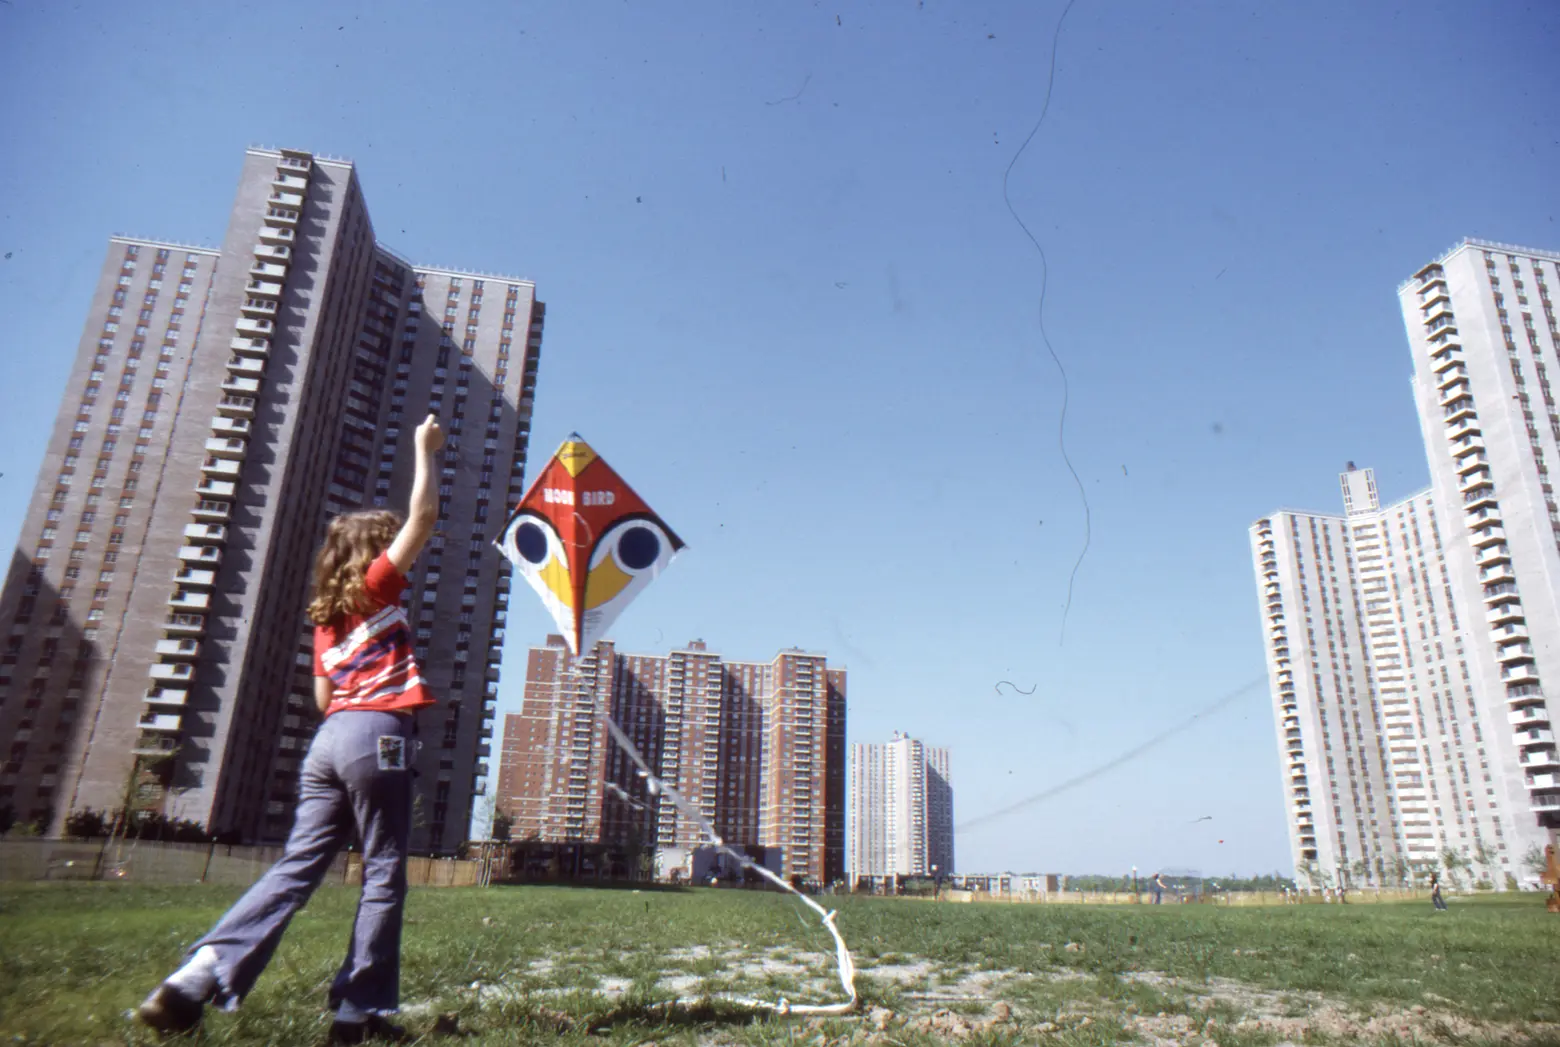 50 years at Co-op City: The history of the world’s largest co-operative housing development